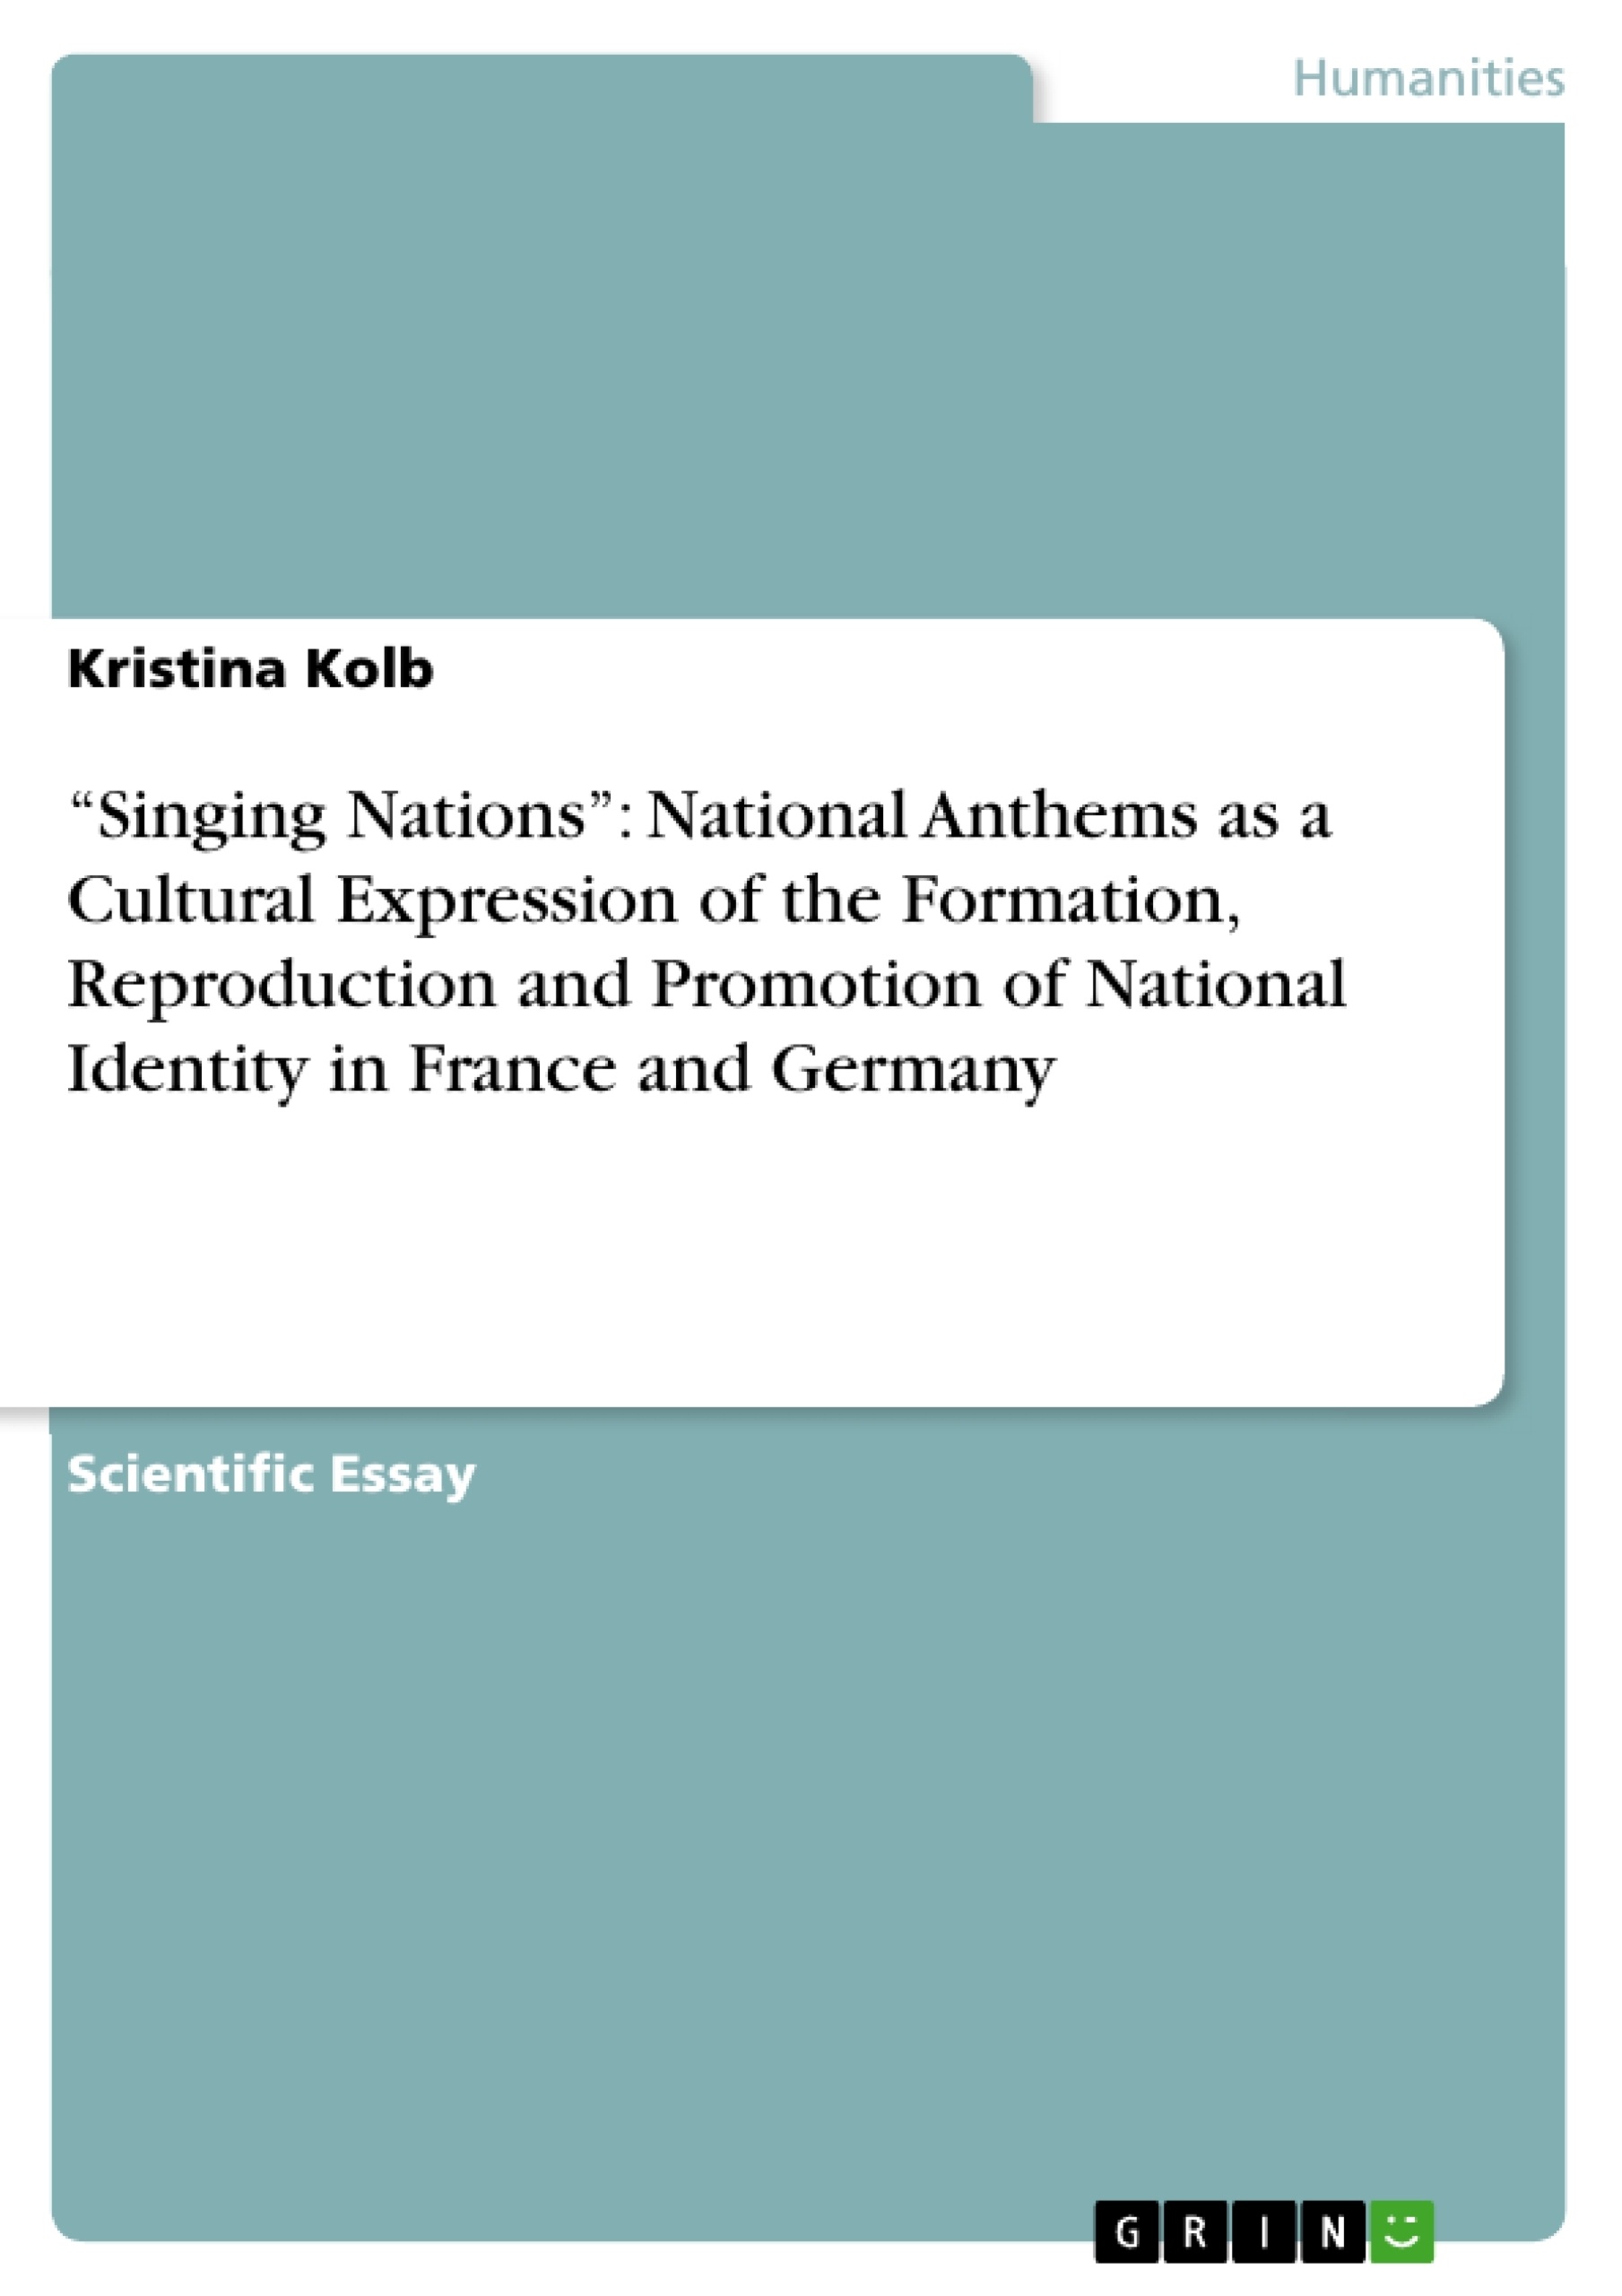 Título: “Singing Nations”: National Anthems as a Cultural Expression of the Formation, Reproduction and Promotion of National Identity in France and Germany